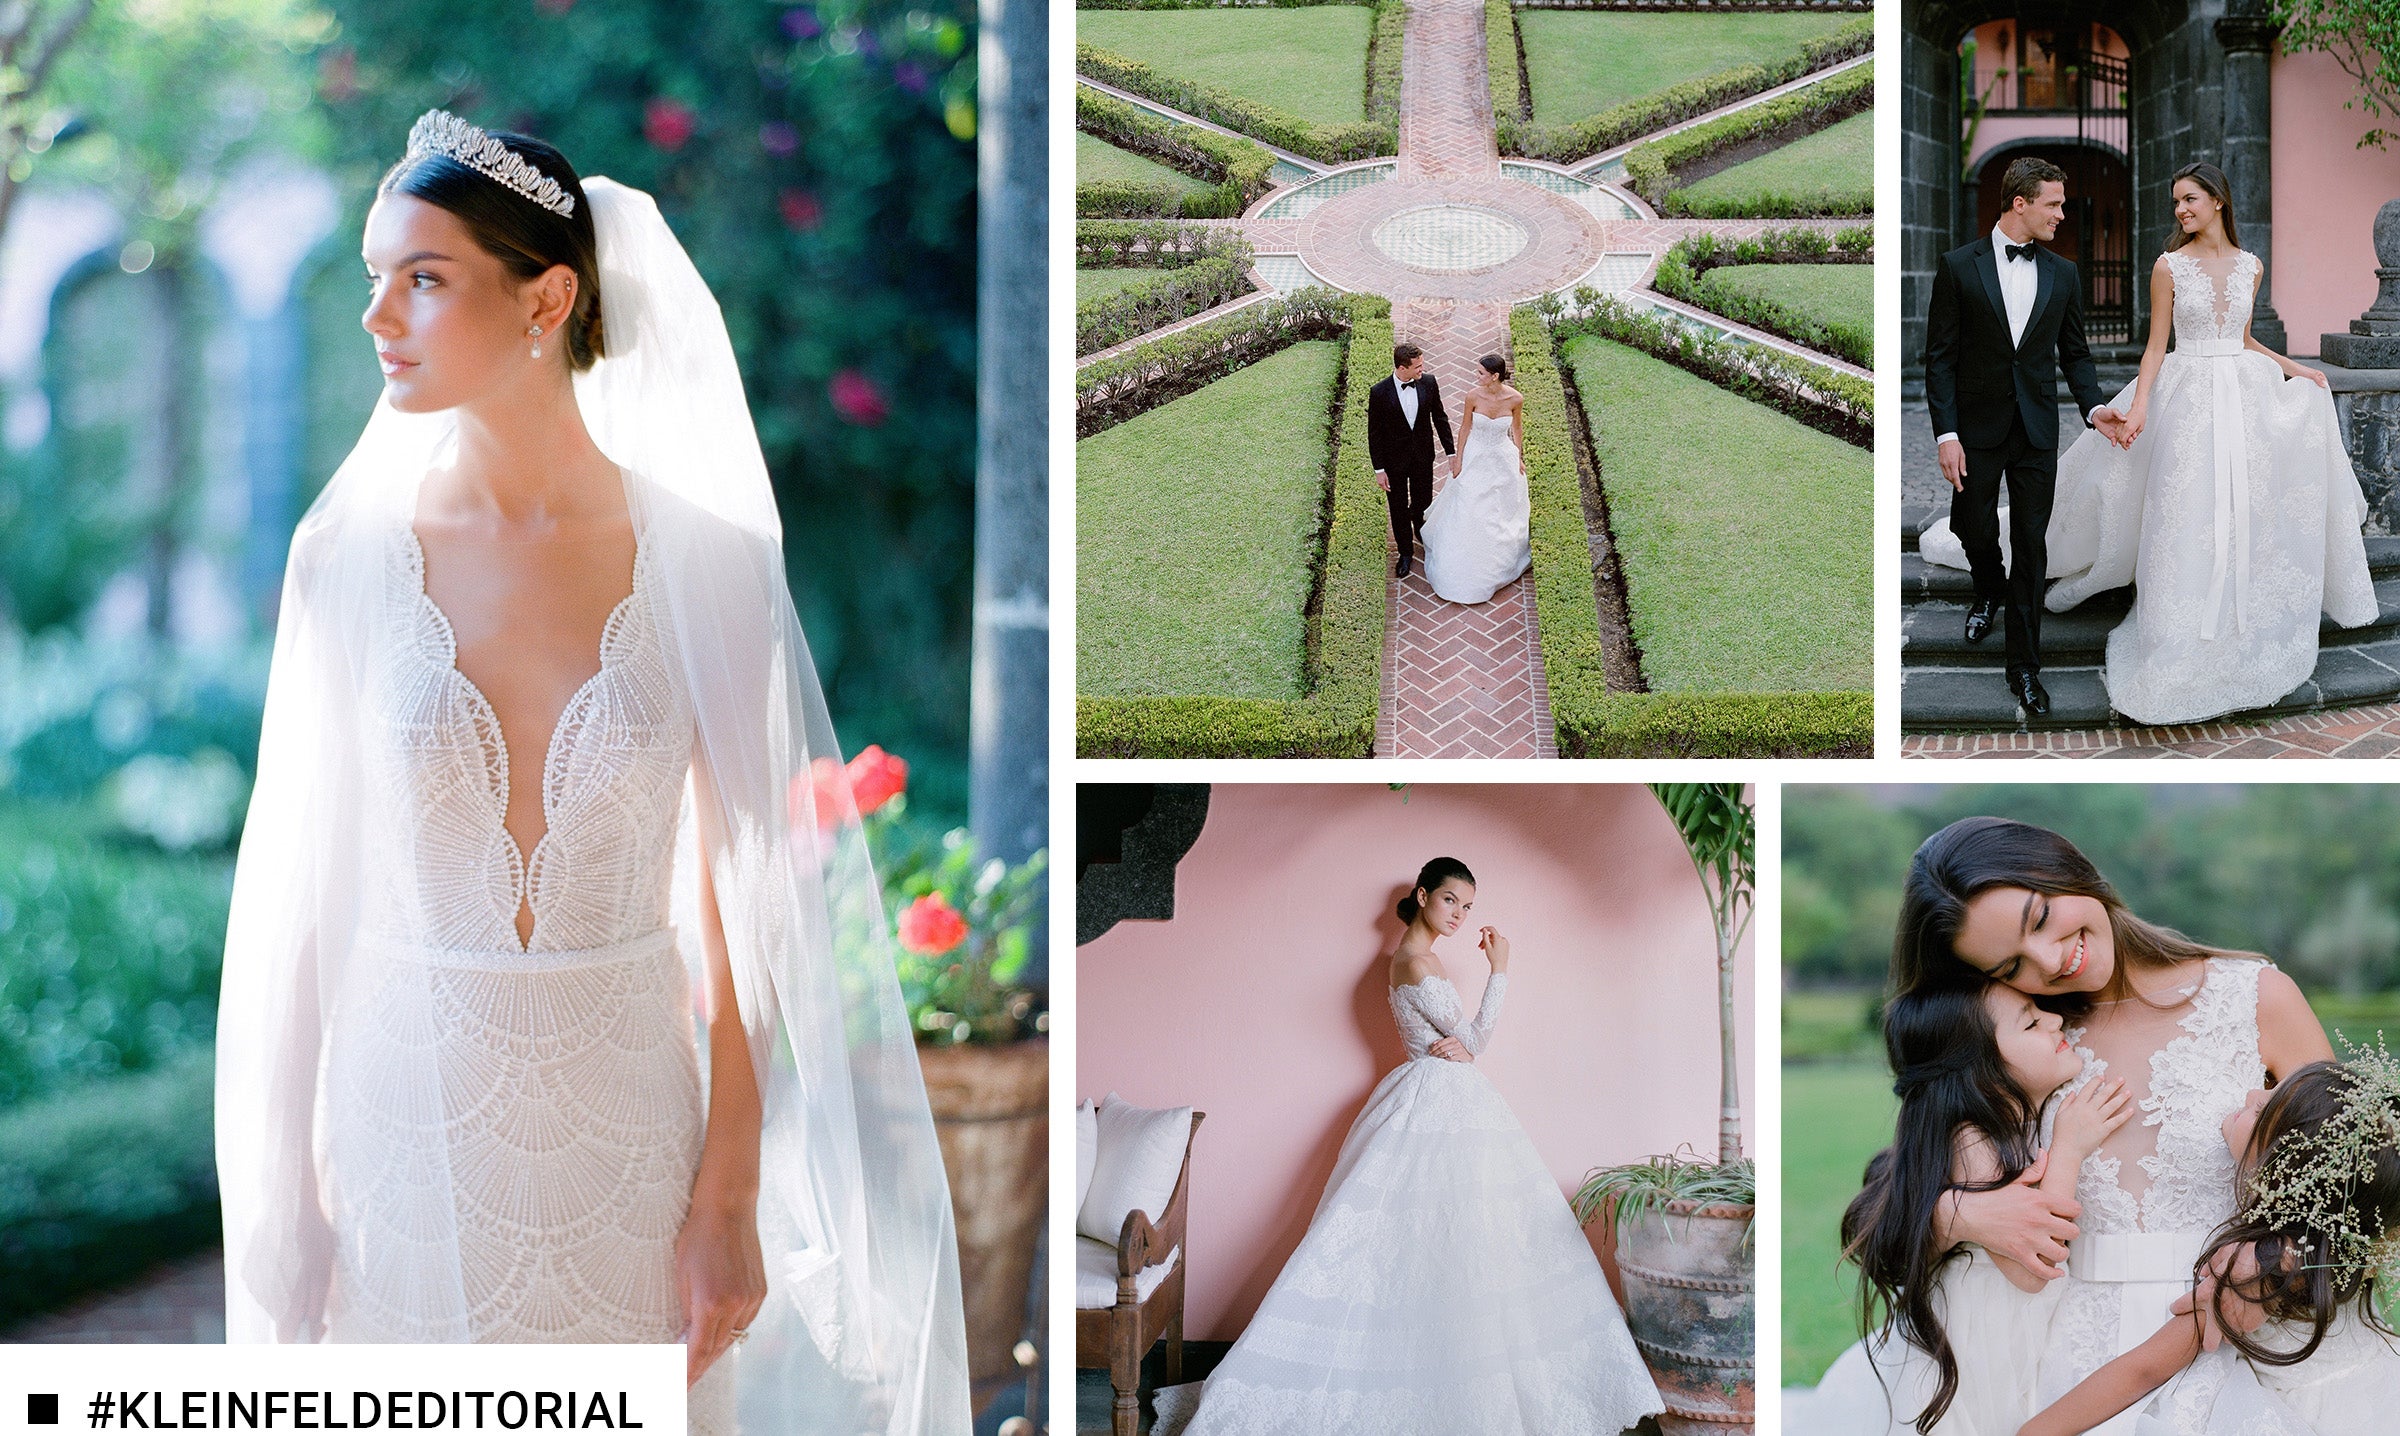 Abiti Da Sposa Kleinfeld Sito Ufficiale.Kleinfeld Bridal The Largest Selection Of Wedding Dresses In The